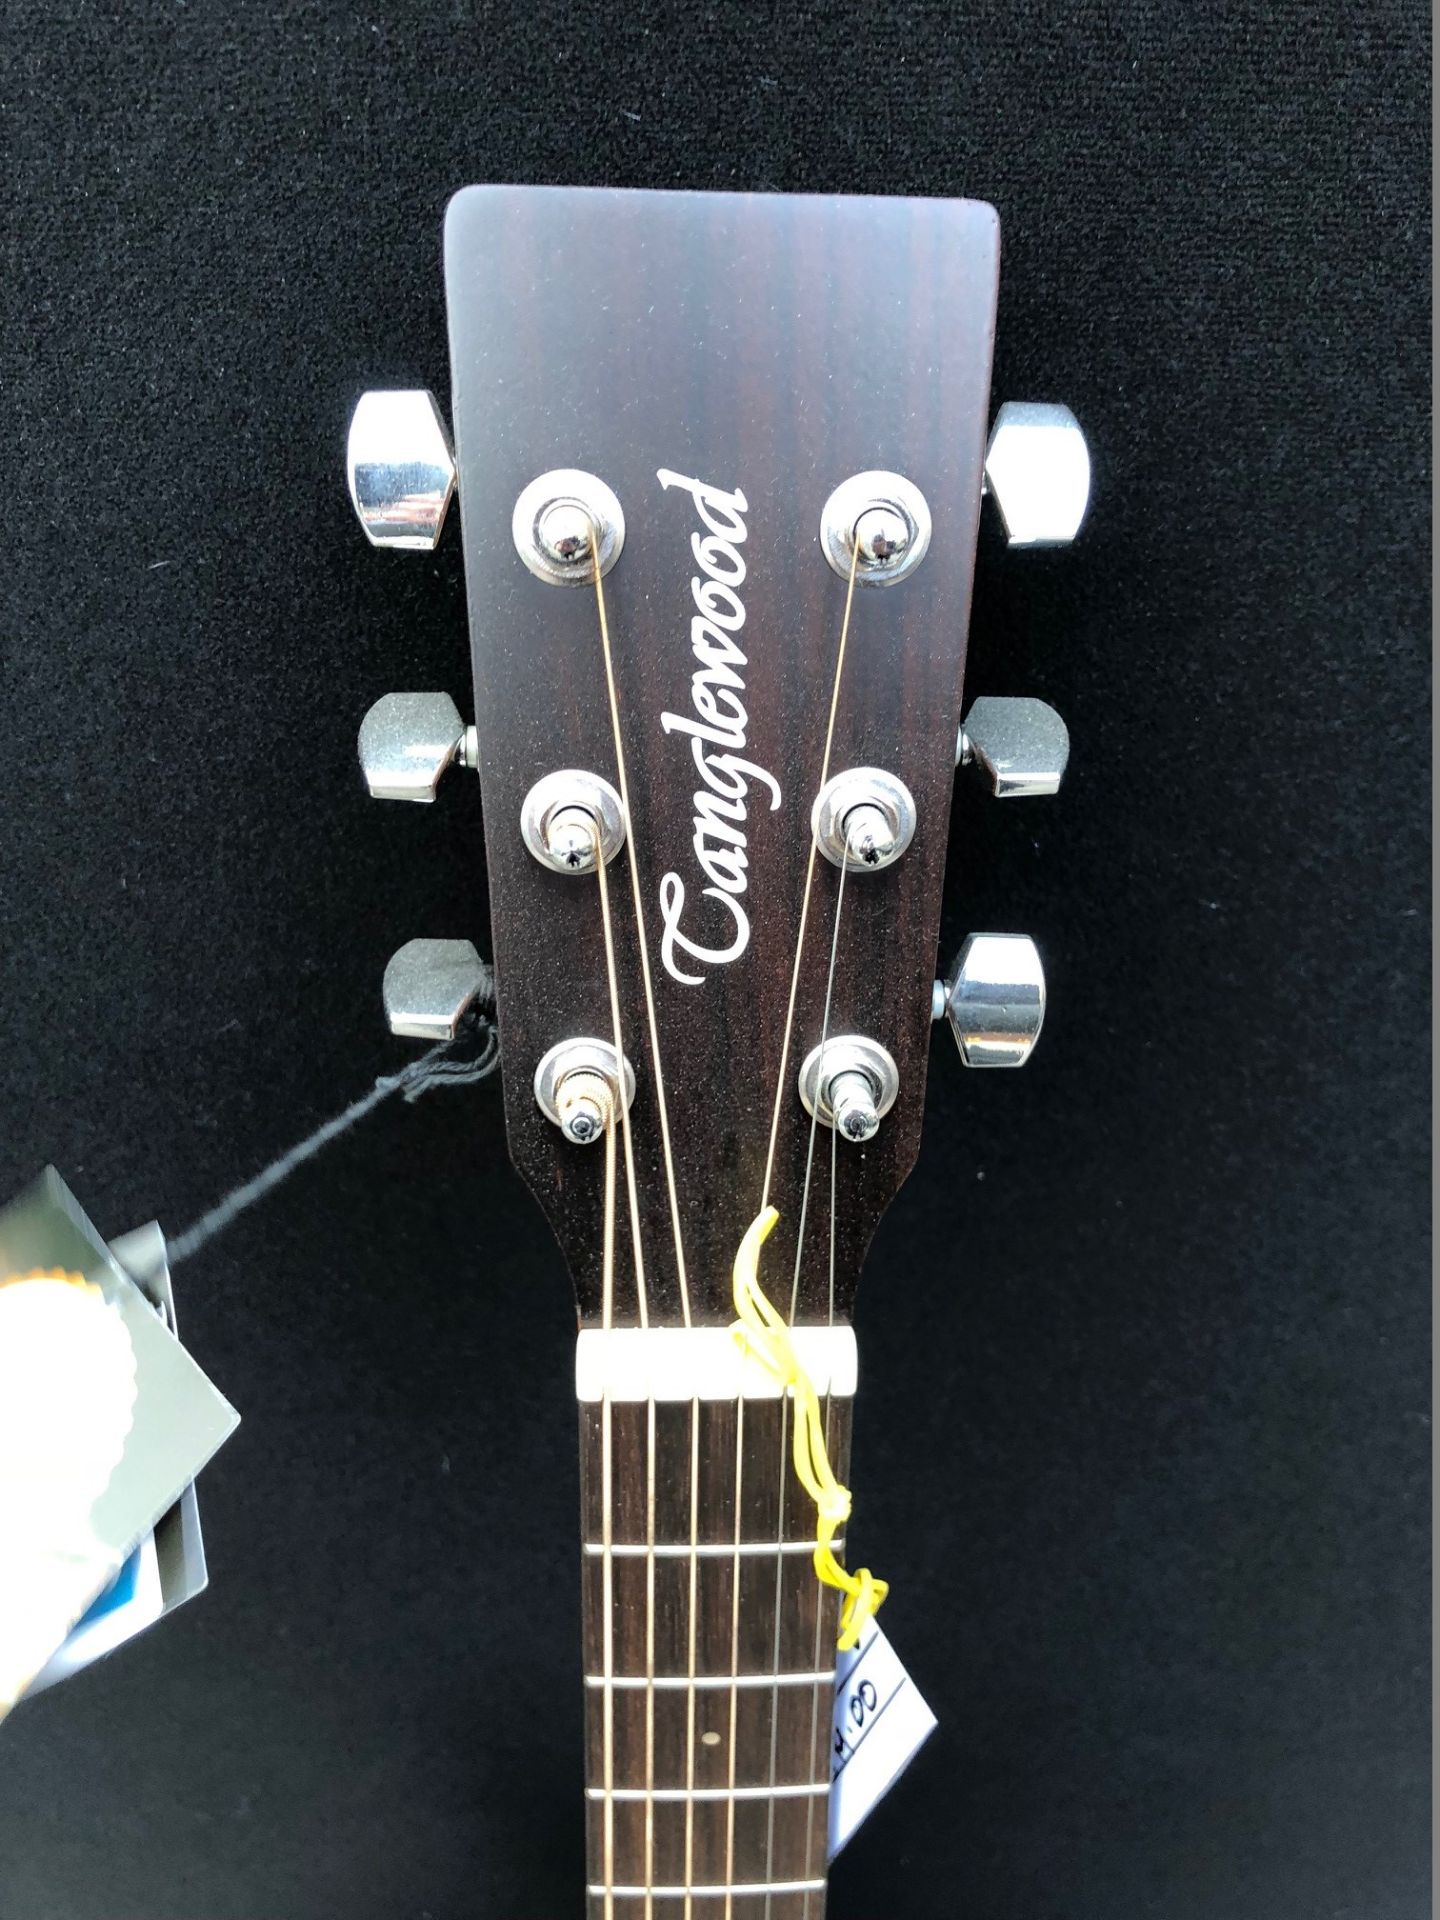 Tanglewood TW2 Acoustic Guitar (Brand New Ex Display - RRP £299.00) - Image 3 of 6